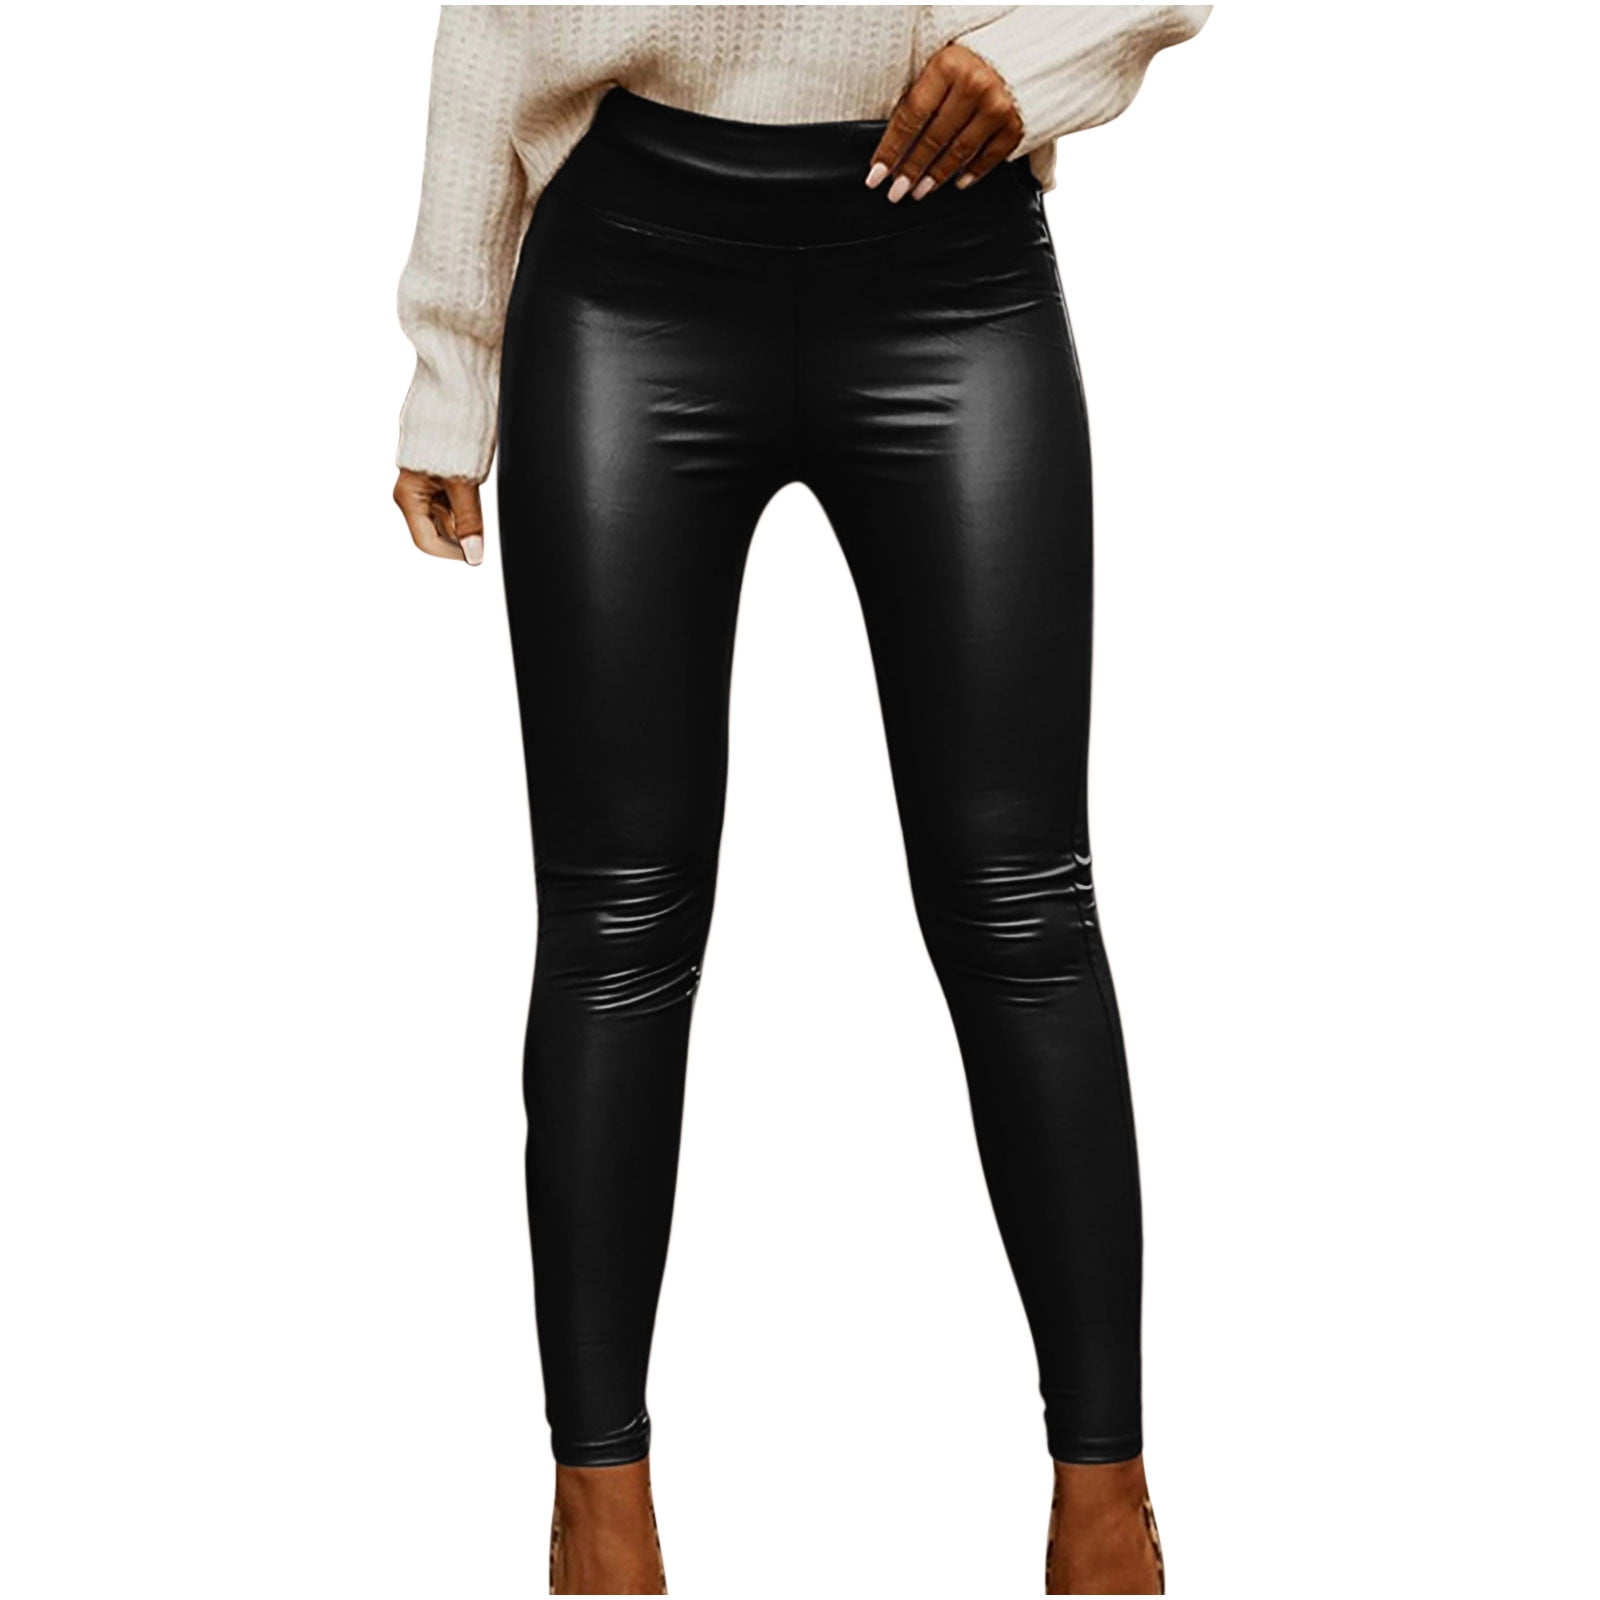  Wine Red Faux Leather Leggings For Women Tummy Control  Dressy Leggings High Waisted Pleather Pants